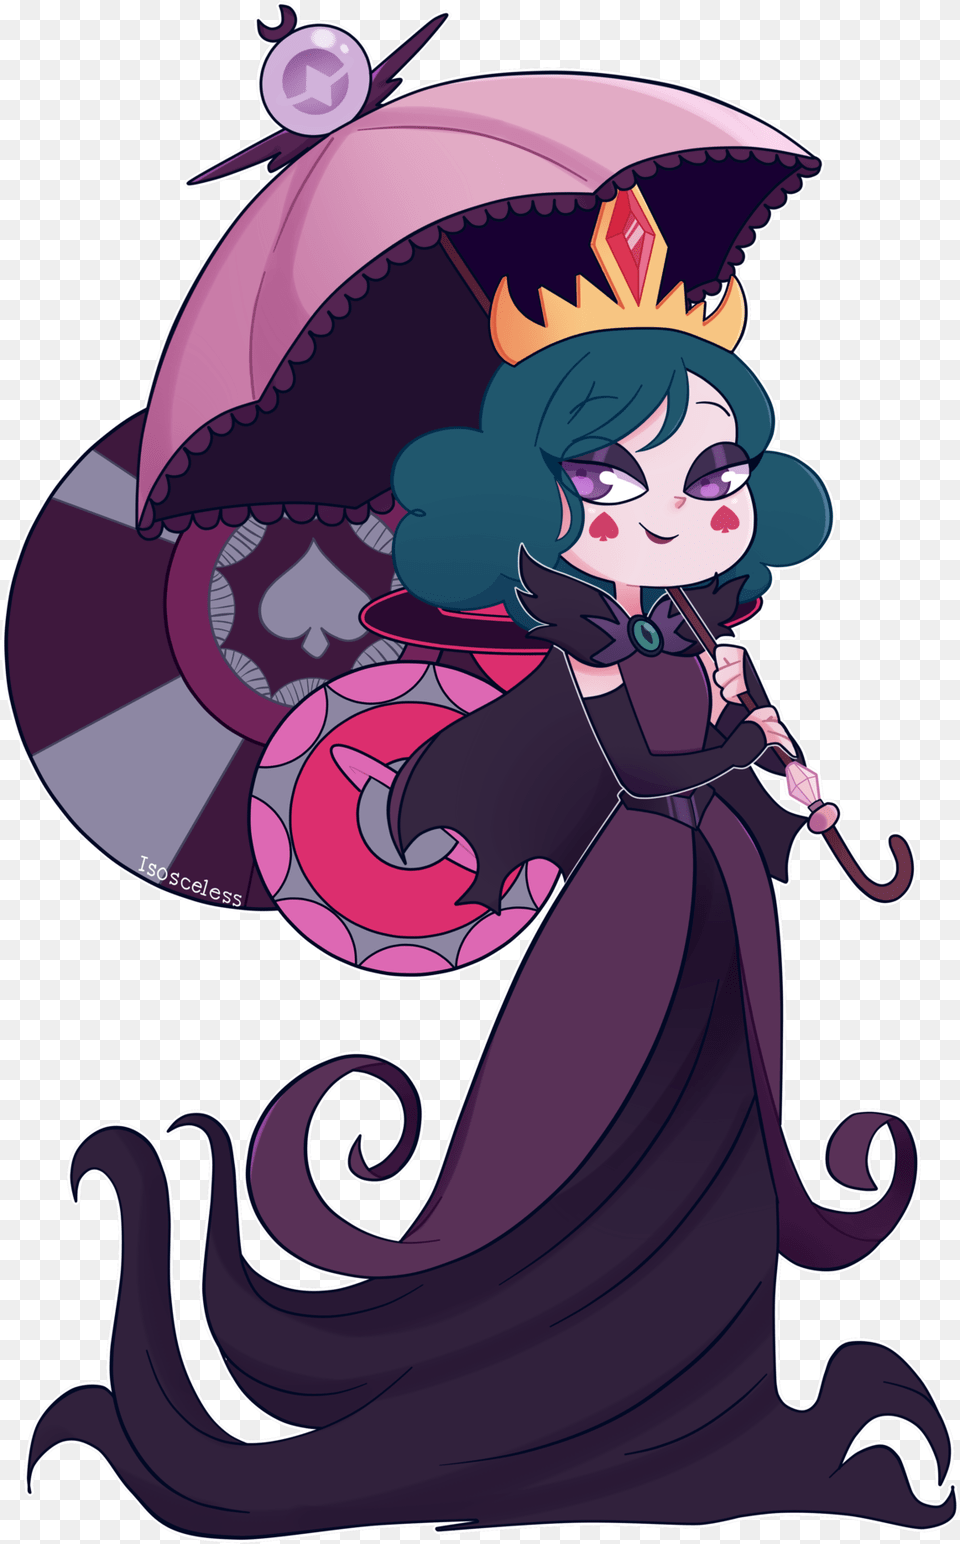 Queens Of Mewni Star Vs The Forces Of Evil Svtfoe Eclipsa Star Vs The Forces Of Evil Eclipsa, Face, Head, Person, Book Png Image